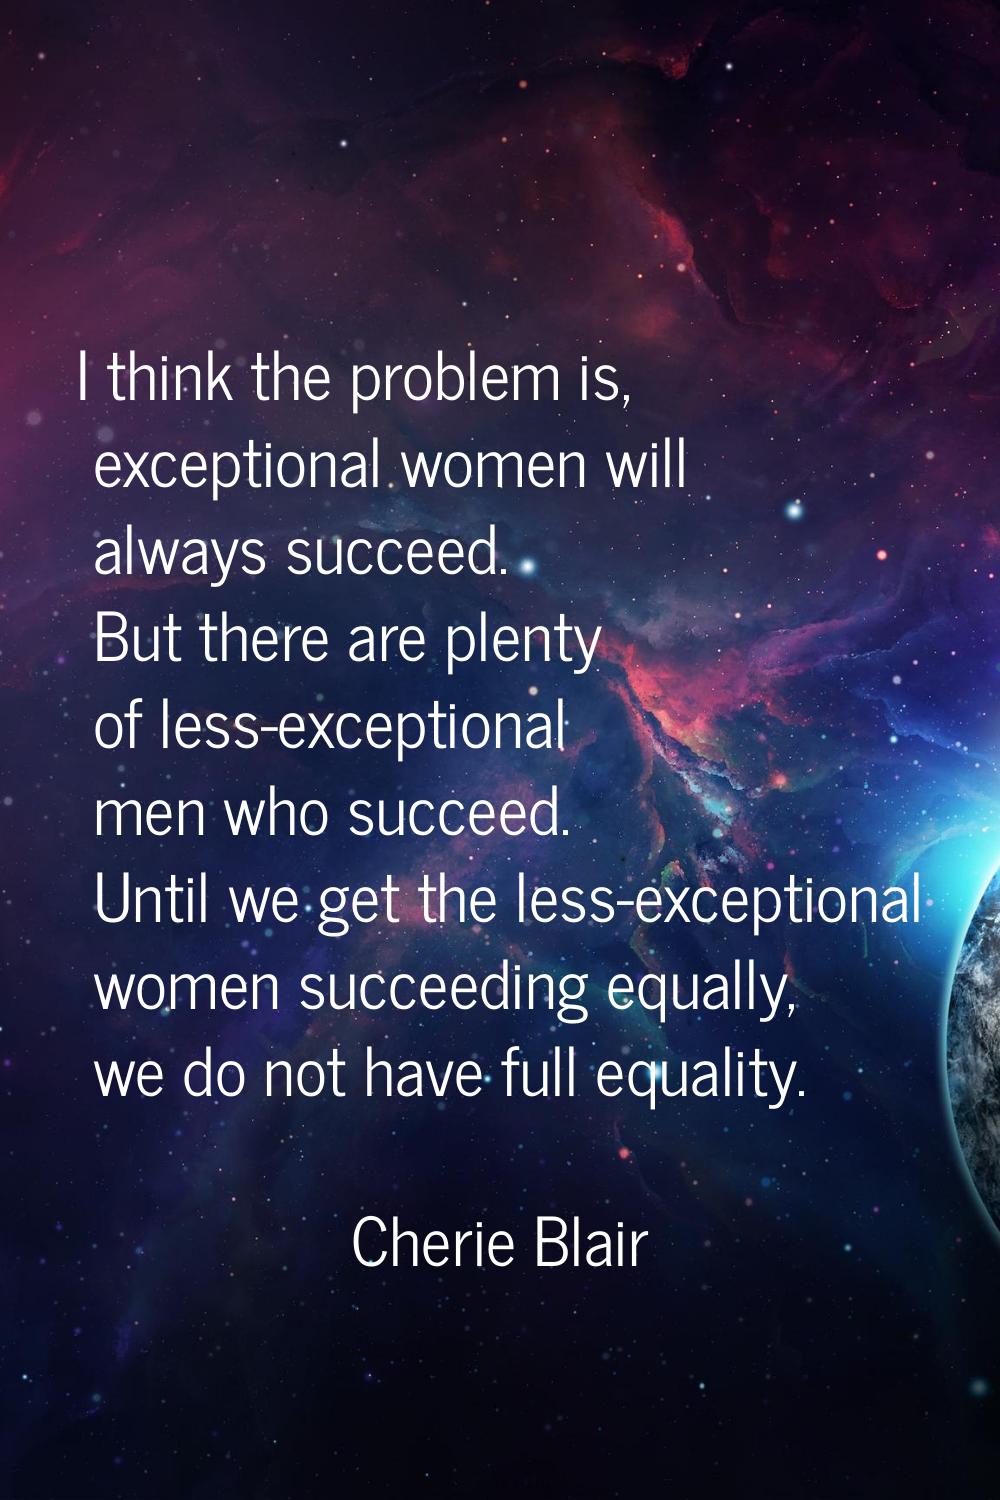 I think the problem is, exceptional women will always succeed. But there are plenty of less-excepti